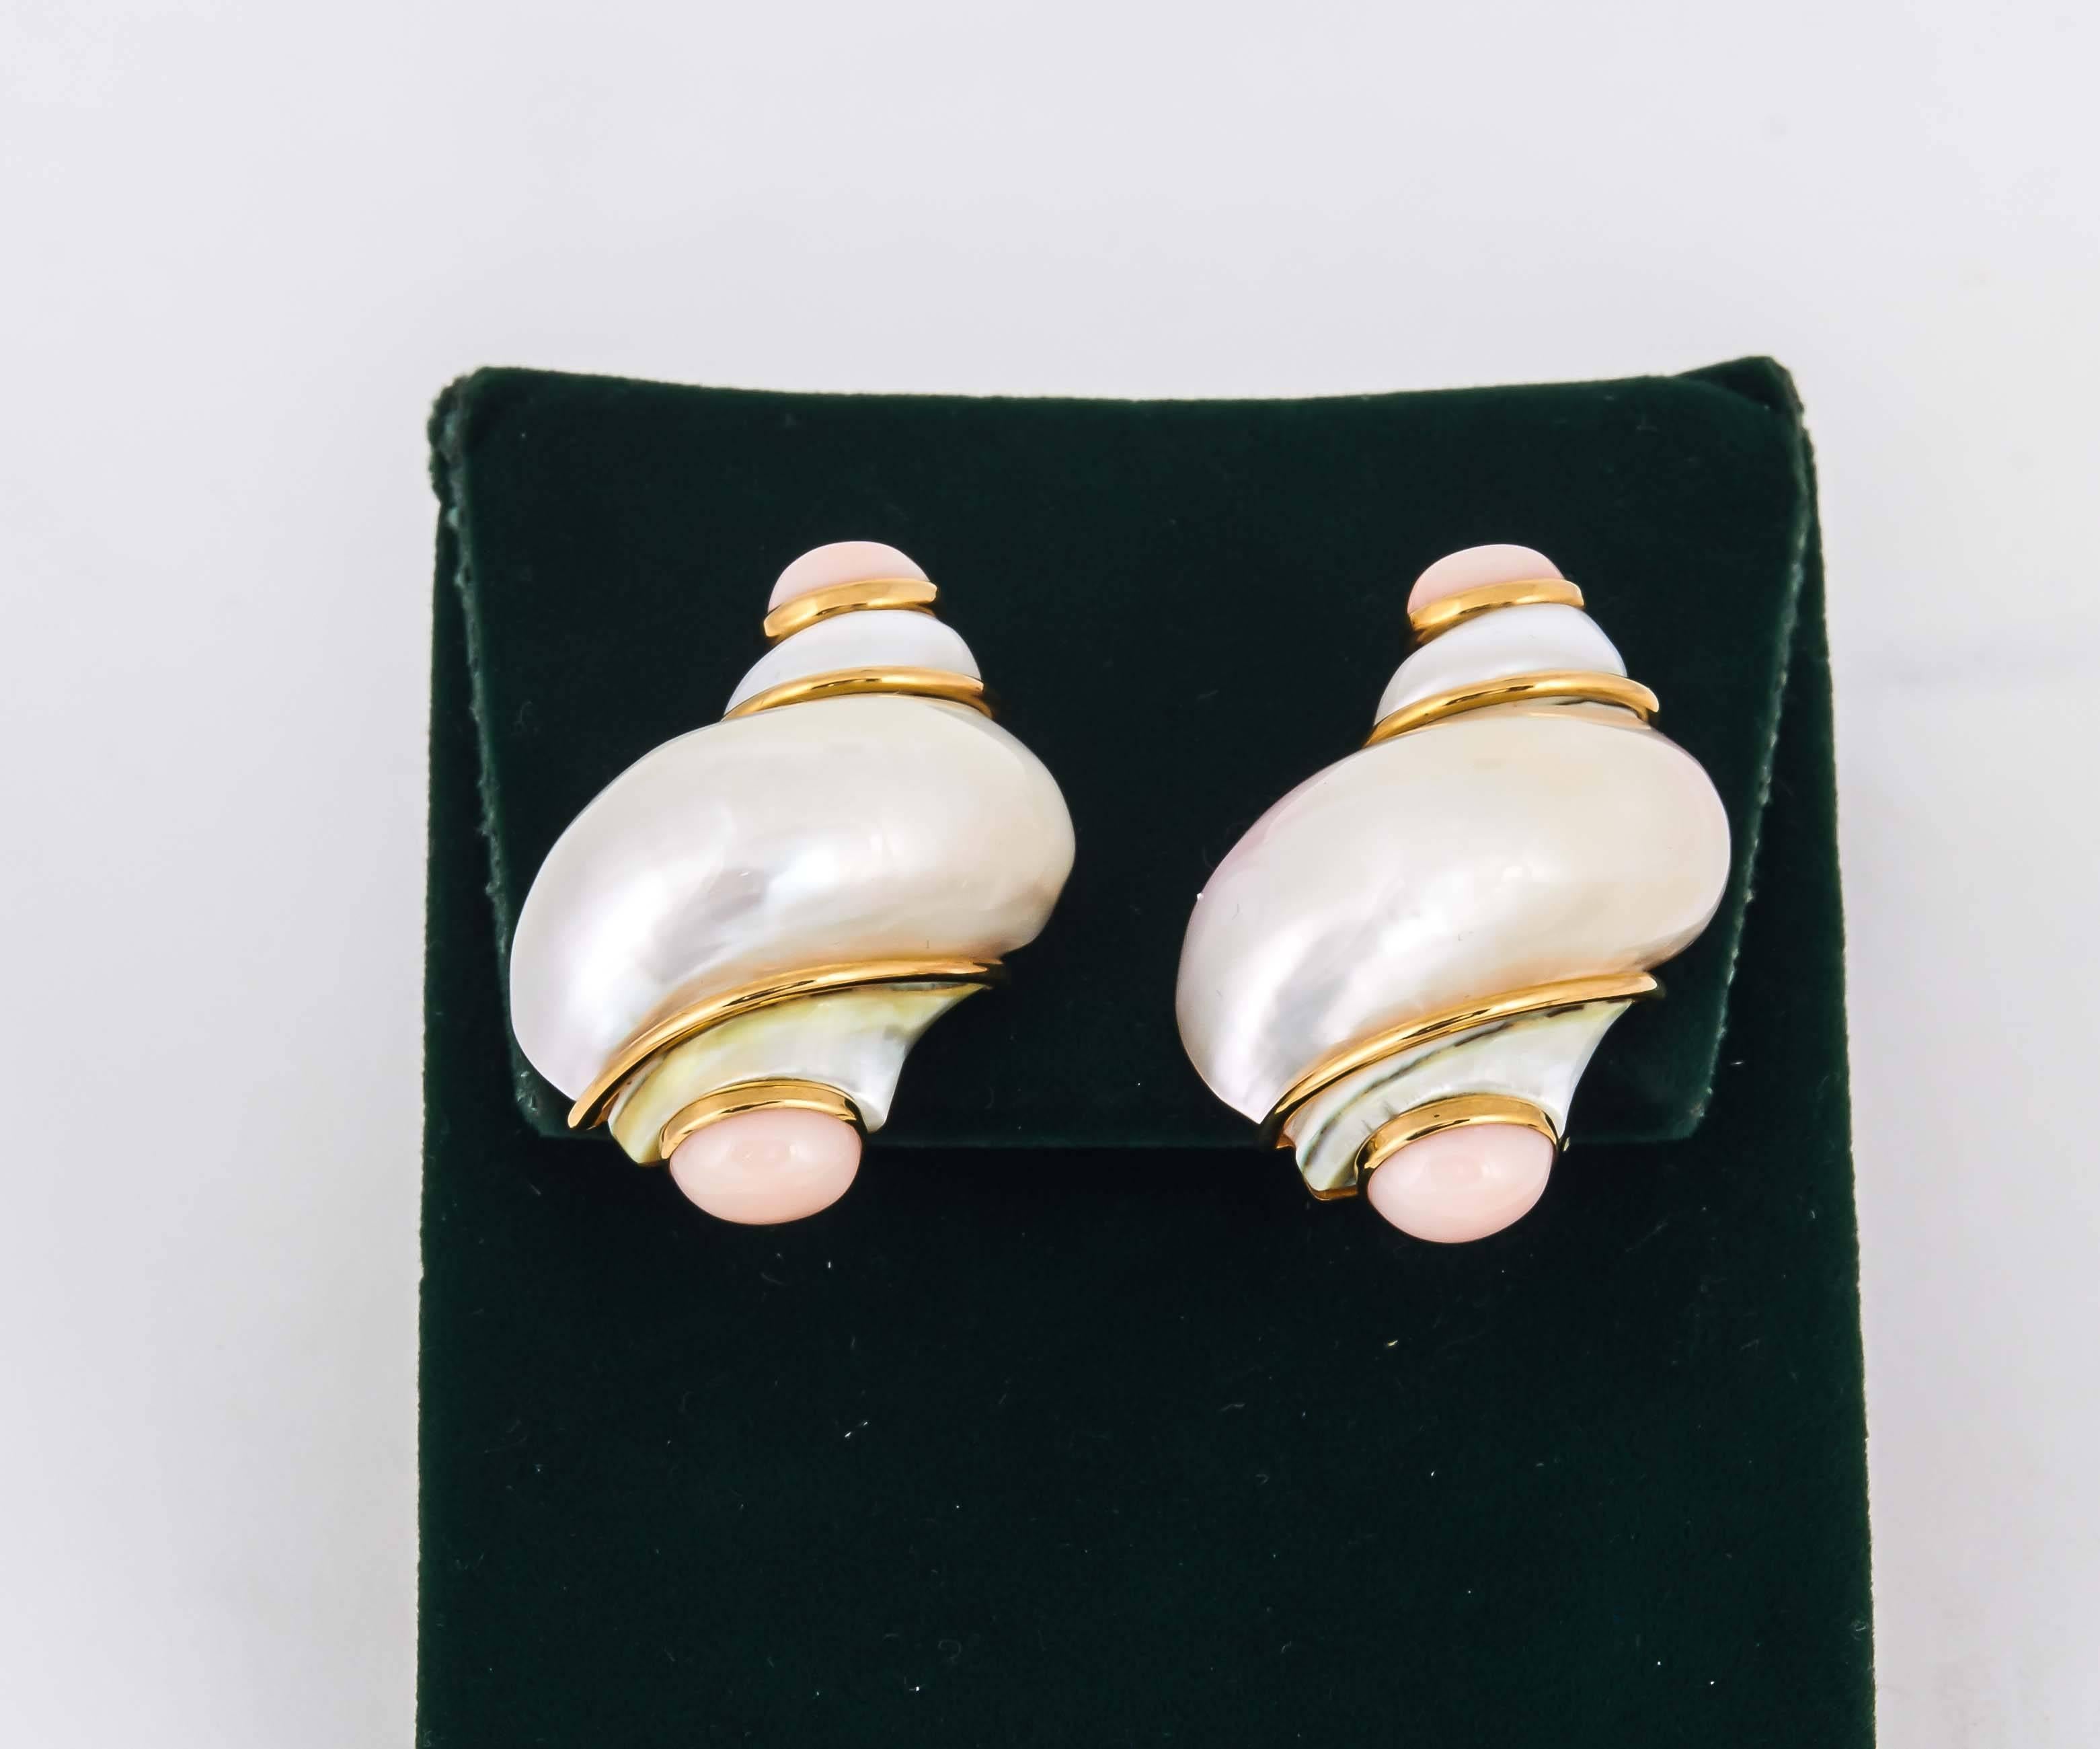 18kt Yellow Gold Shell Design Earclips Composed Of Two Large Pink Irridescent Mother Of Pearl Stones Measuring Approximately 28mm Each. Further Designed With Four Cabochon Cut Angel Skin Coral Embellishments Measuring 3MM Each Stone. Designed In The